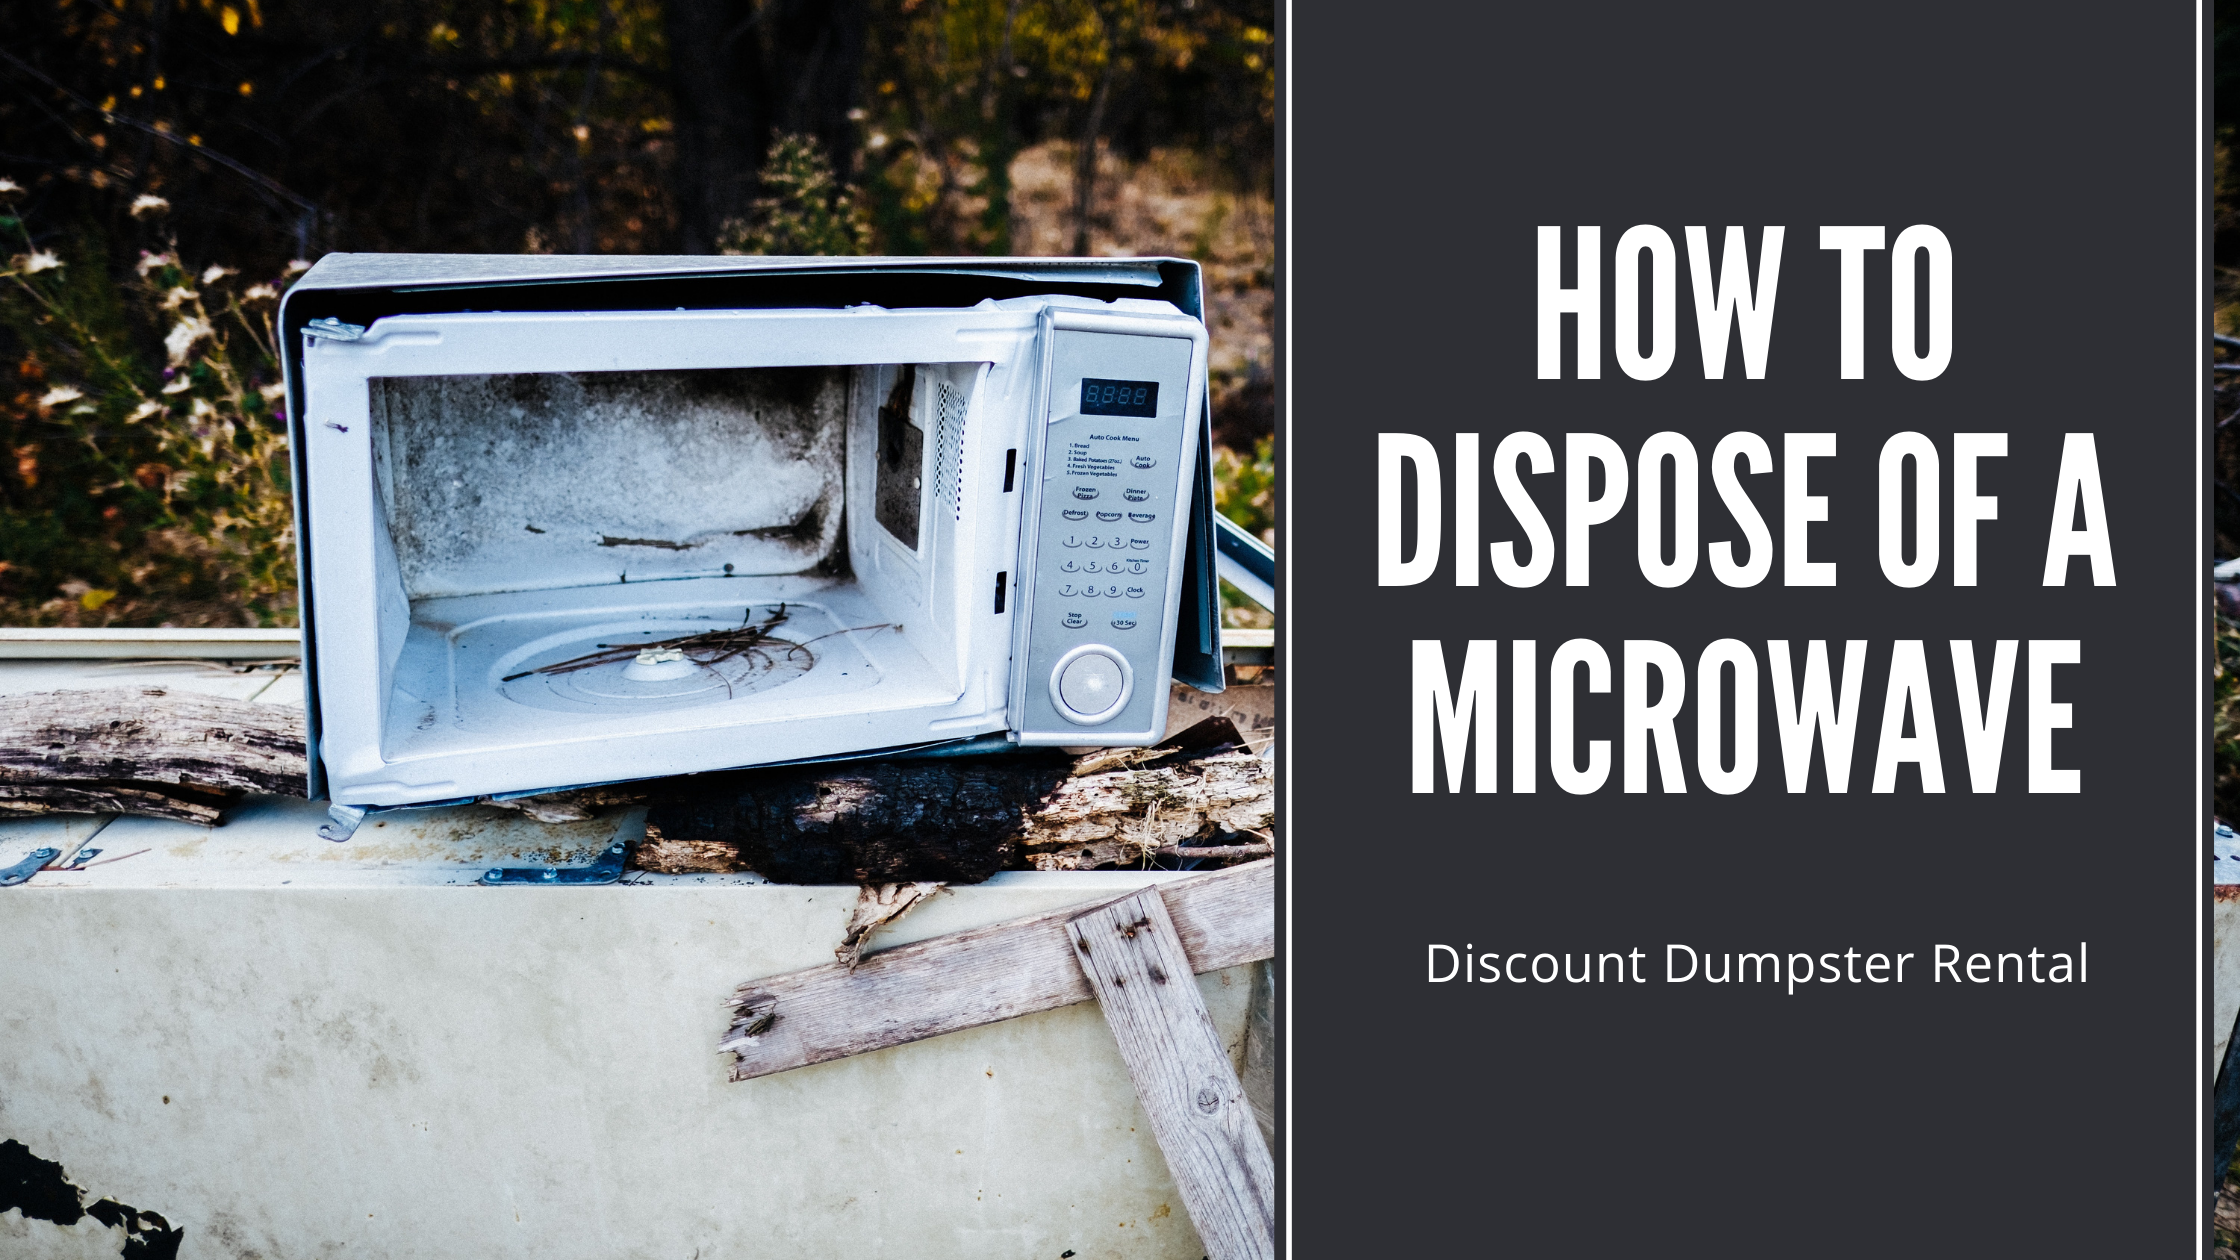 https://discountdumpsterco.com/wp-content/uploads/How-to-dispose-of-a-microwave-blog-banner.png